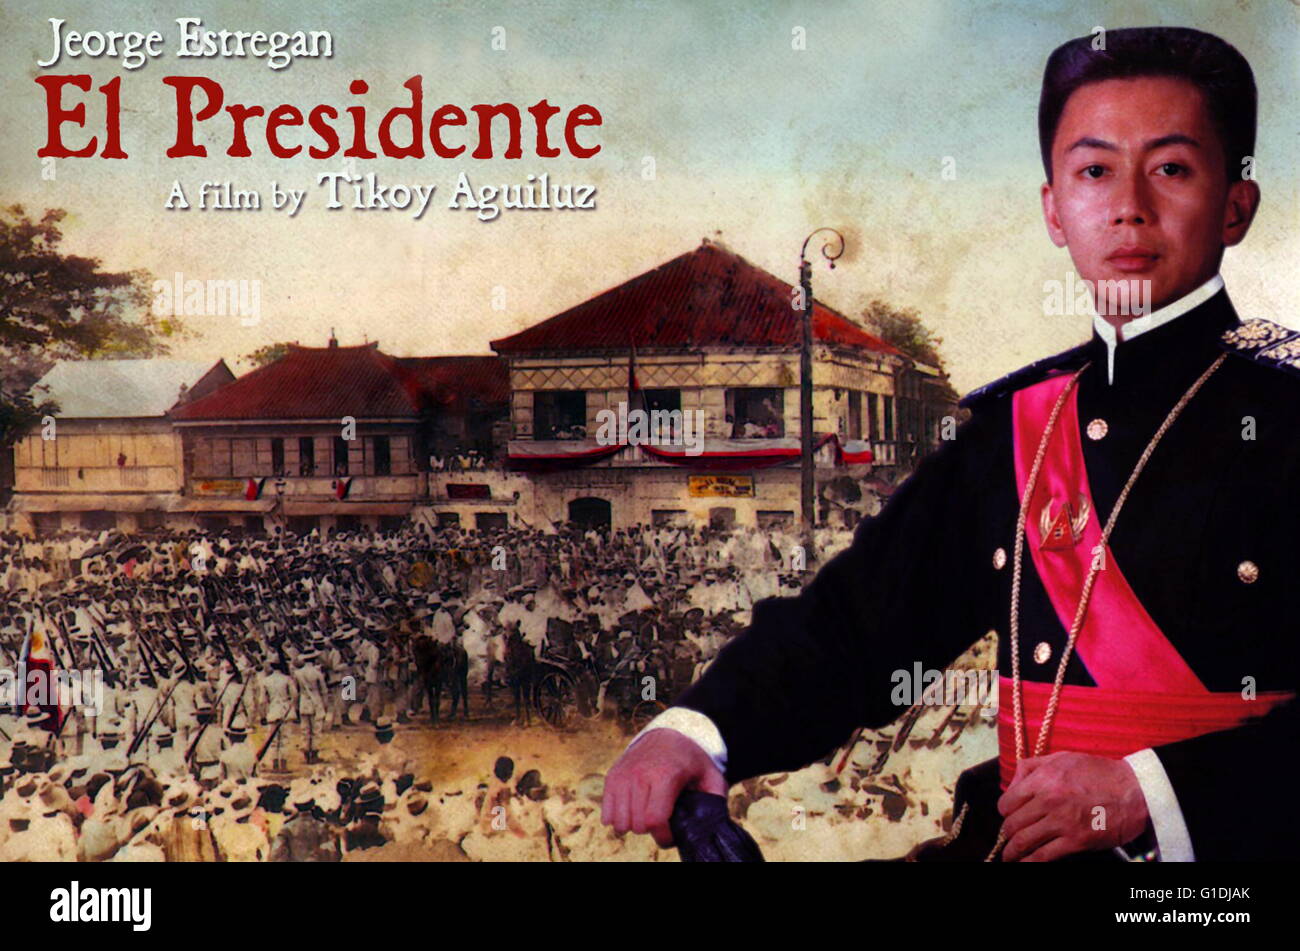 Jericho Ejercito as Emilio Aguinaldo in the 2012 film, El Presidente. Emilio Aguinaldo y Famy (1869 – 1964) Filipino revolutionary, politician, and a military leader who is officially recognized as the First President of the Philippines (1899–1901) and led Philippine forces first against Spain in the latter part of the Philippine Revolution (1896–1897), and then in the Spanish–American War (1898), and finally against the United States during the Philippine–American War (1899–1901). He was captured by American forces in 1901, which brought an end to his presidency. Stock Photo